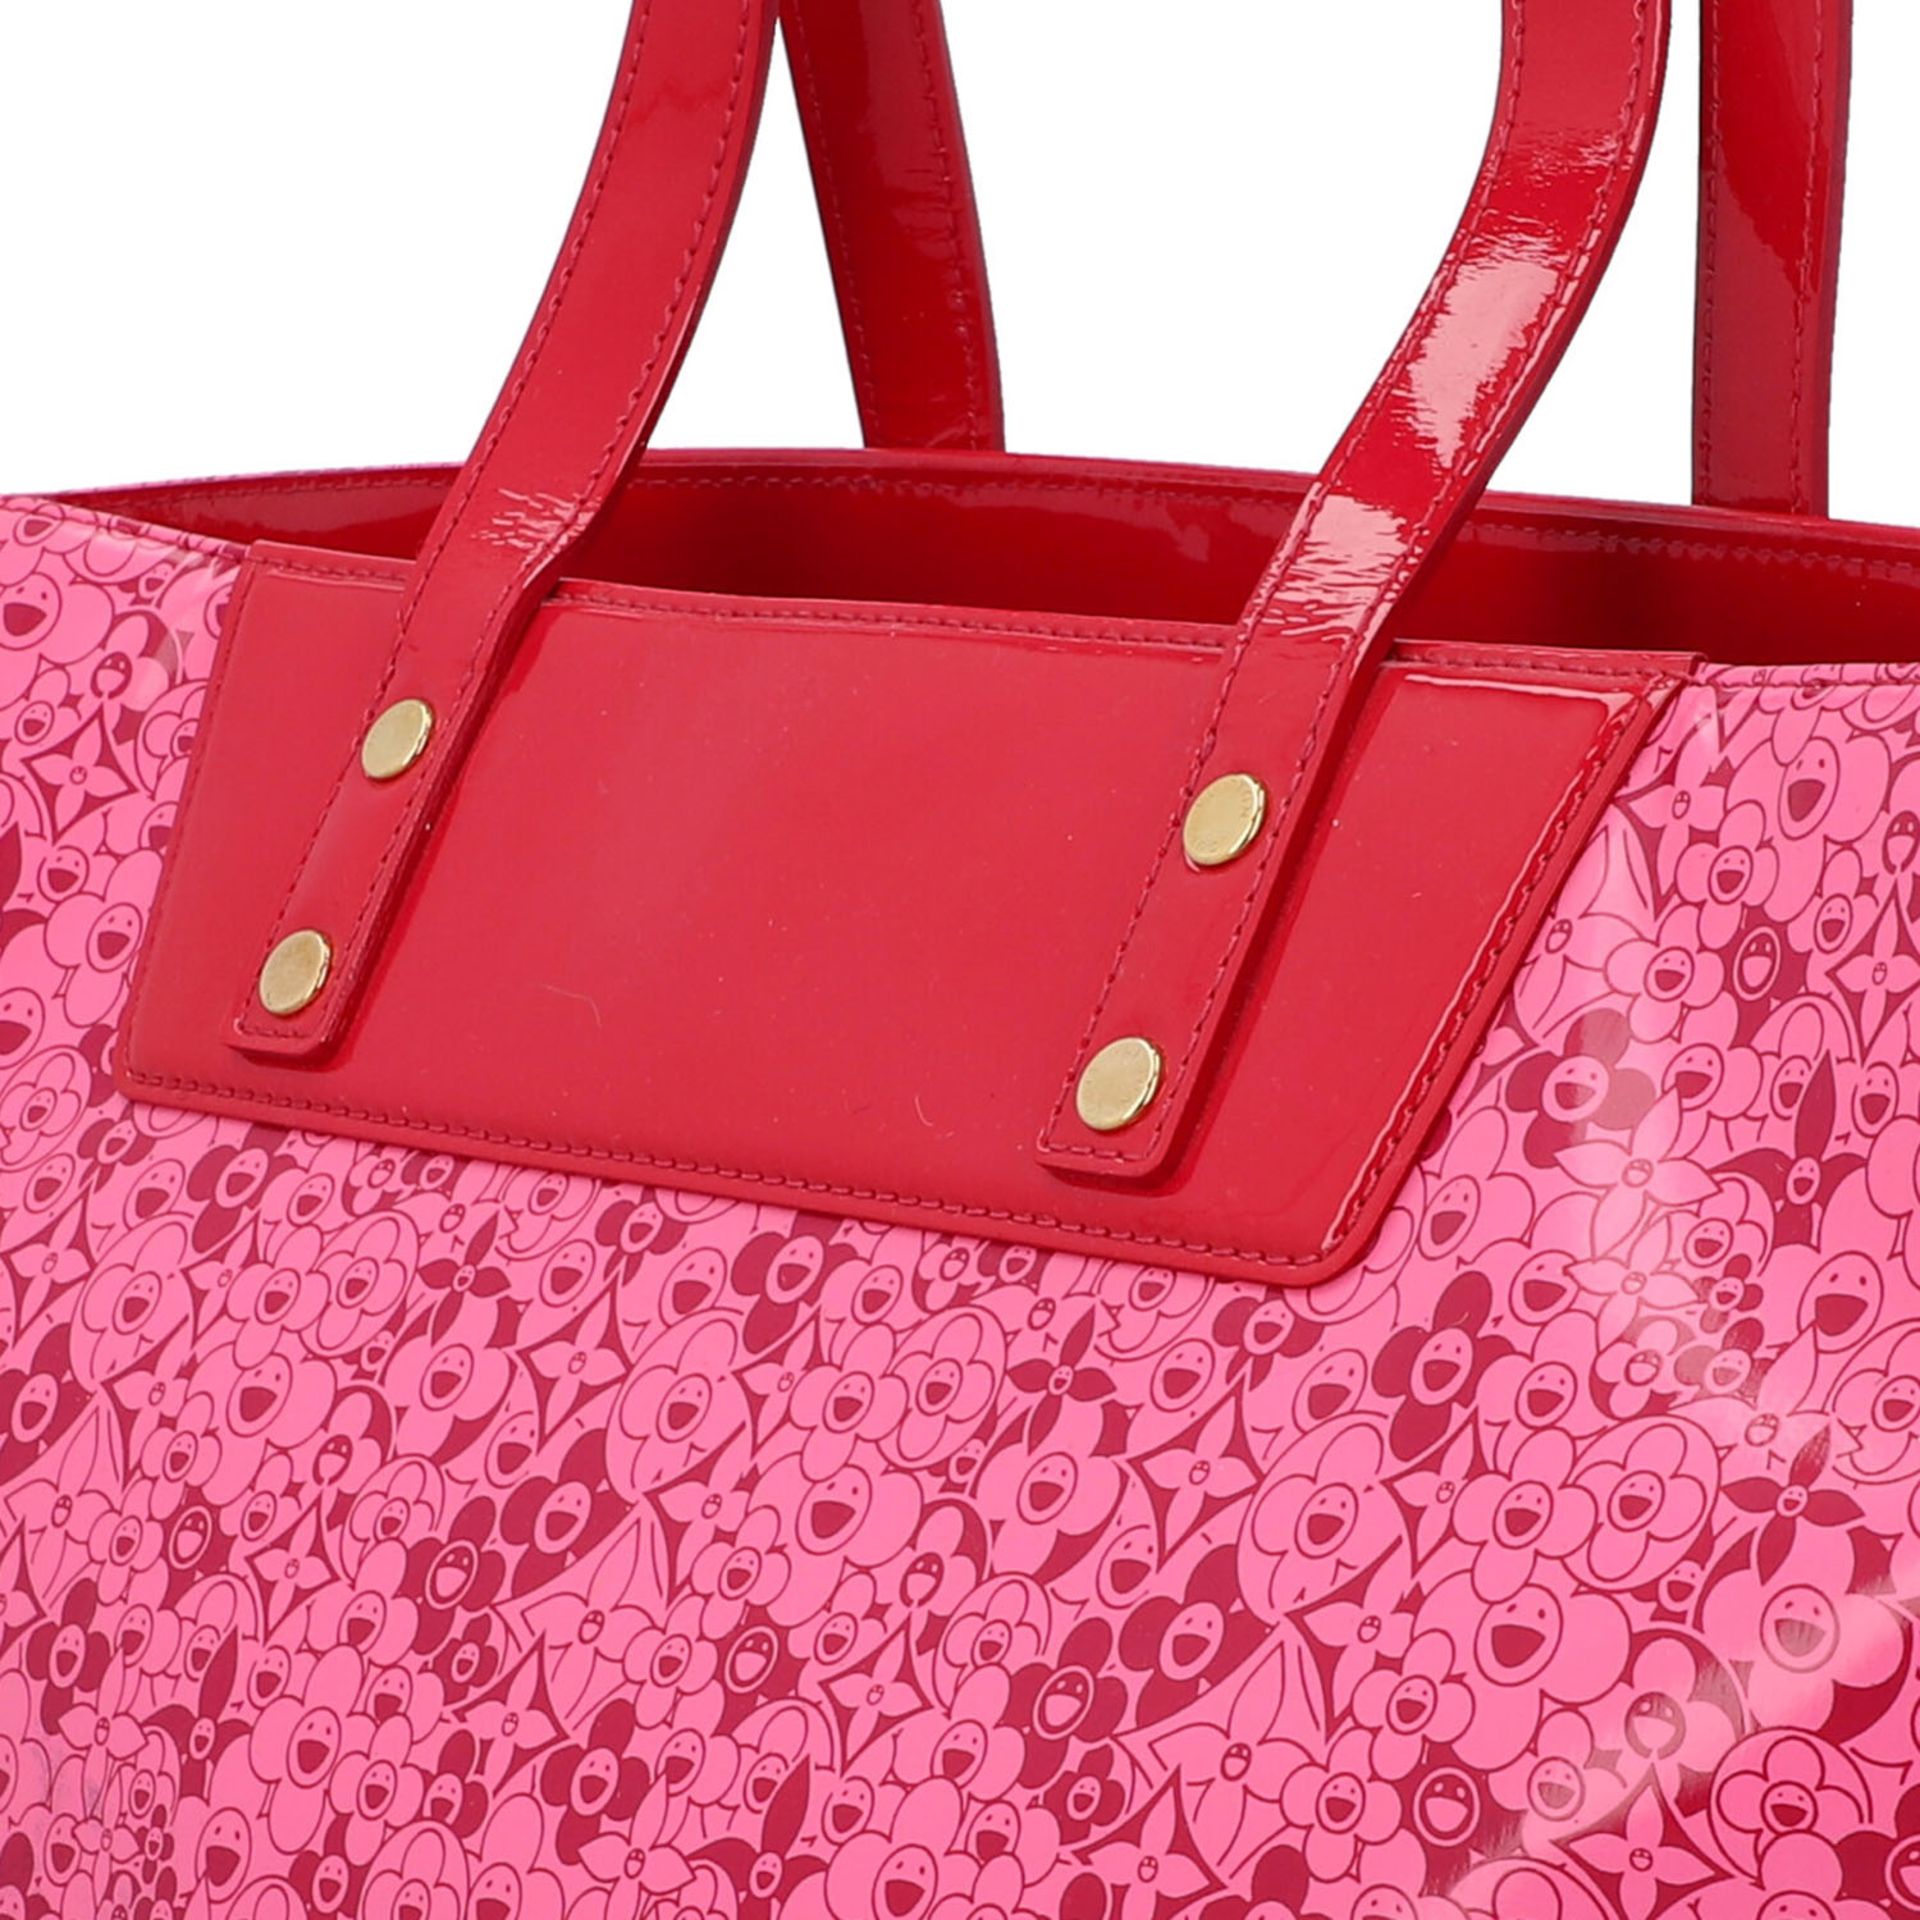 LOUIS VUITTON Shopper "COSMIC BLOSSOM TOTE". - Image 7 of 8